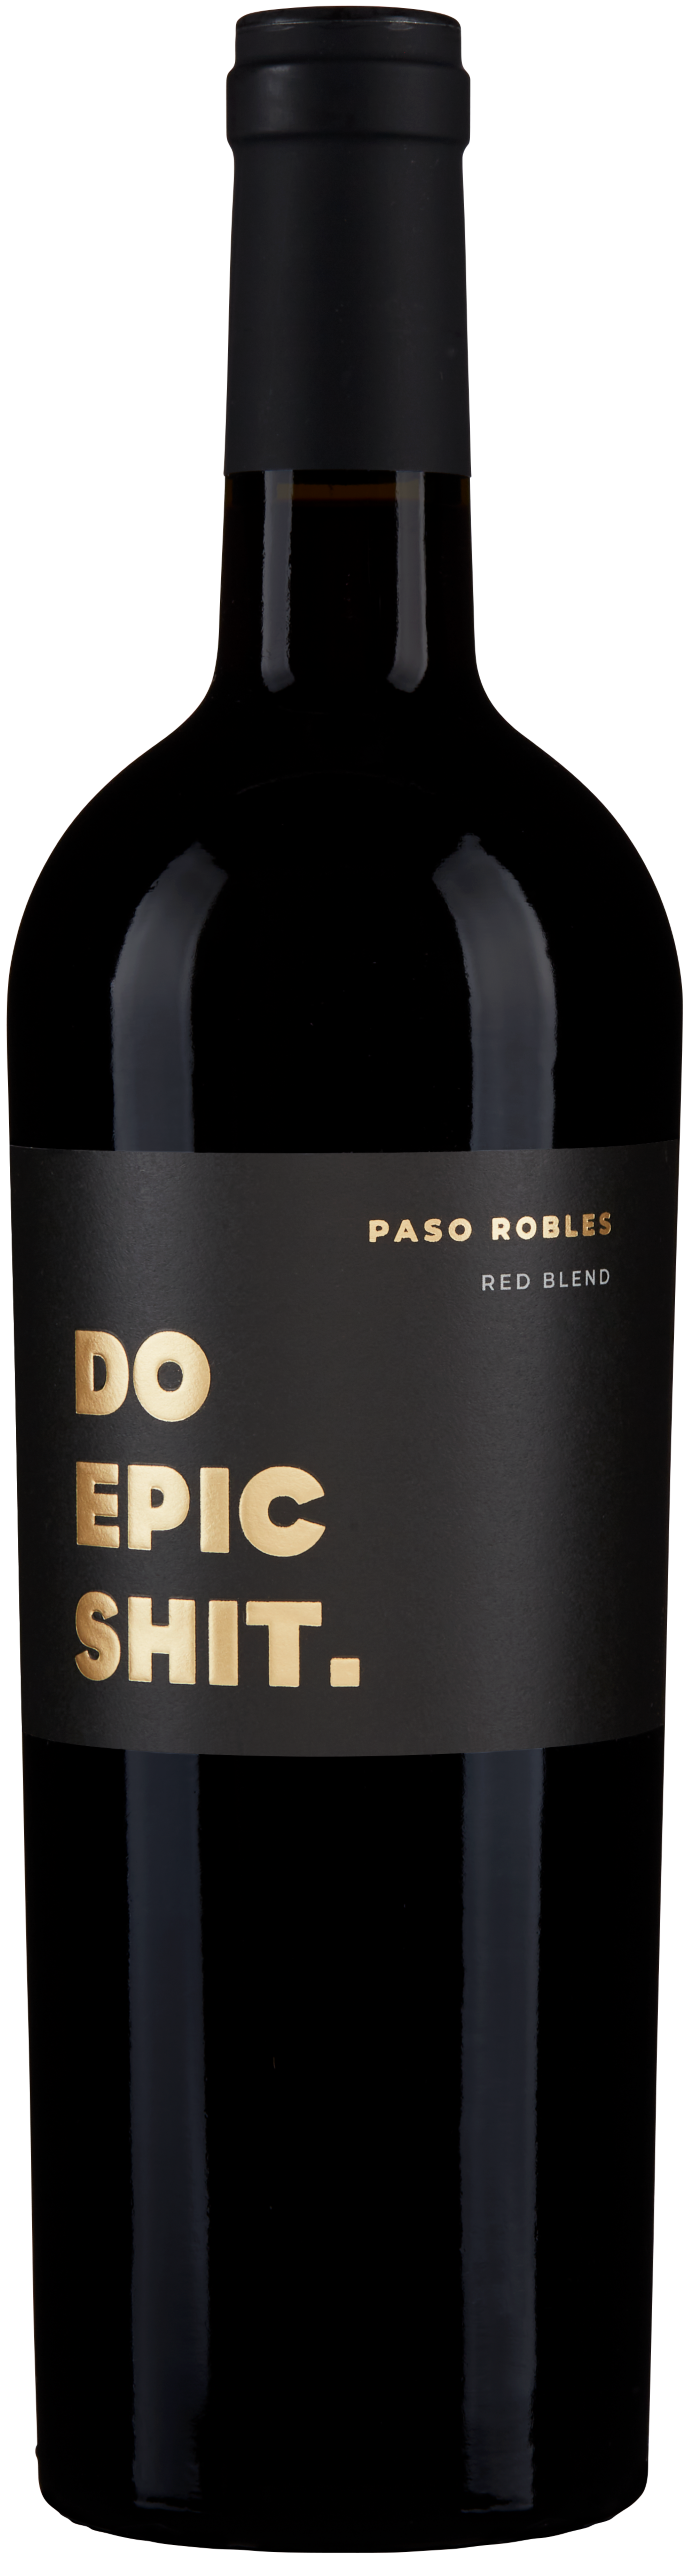 Browne Family Do Epic Shit Paso Robles Red Blend 2021